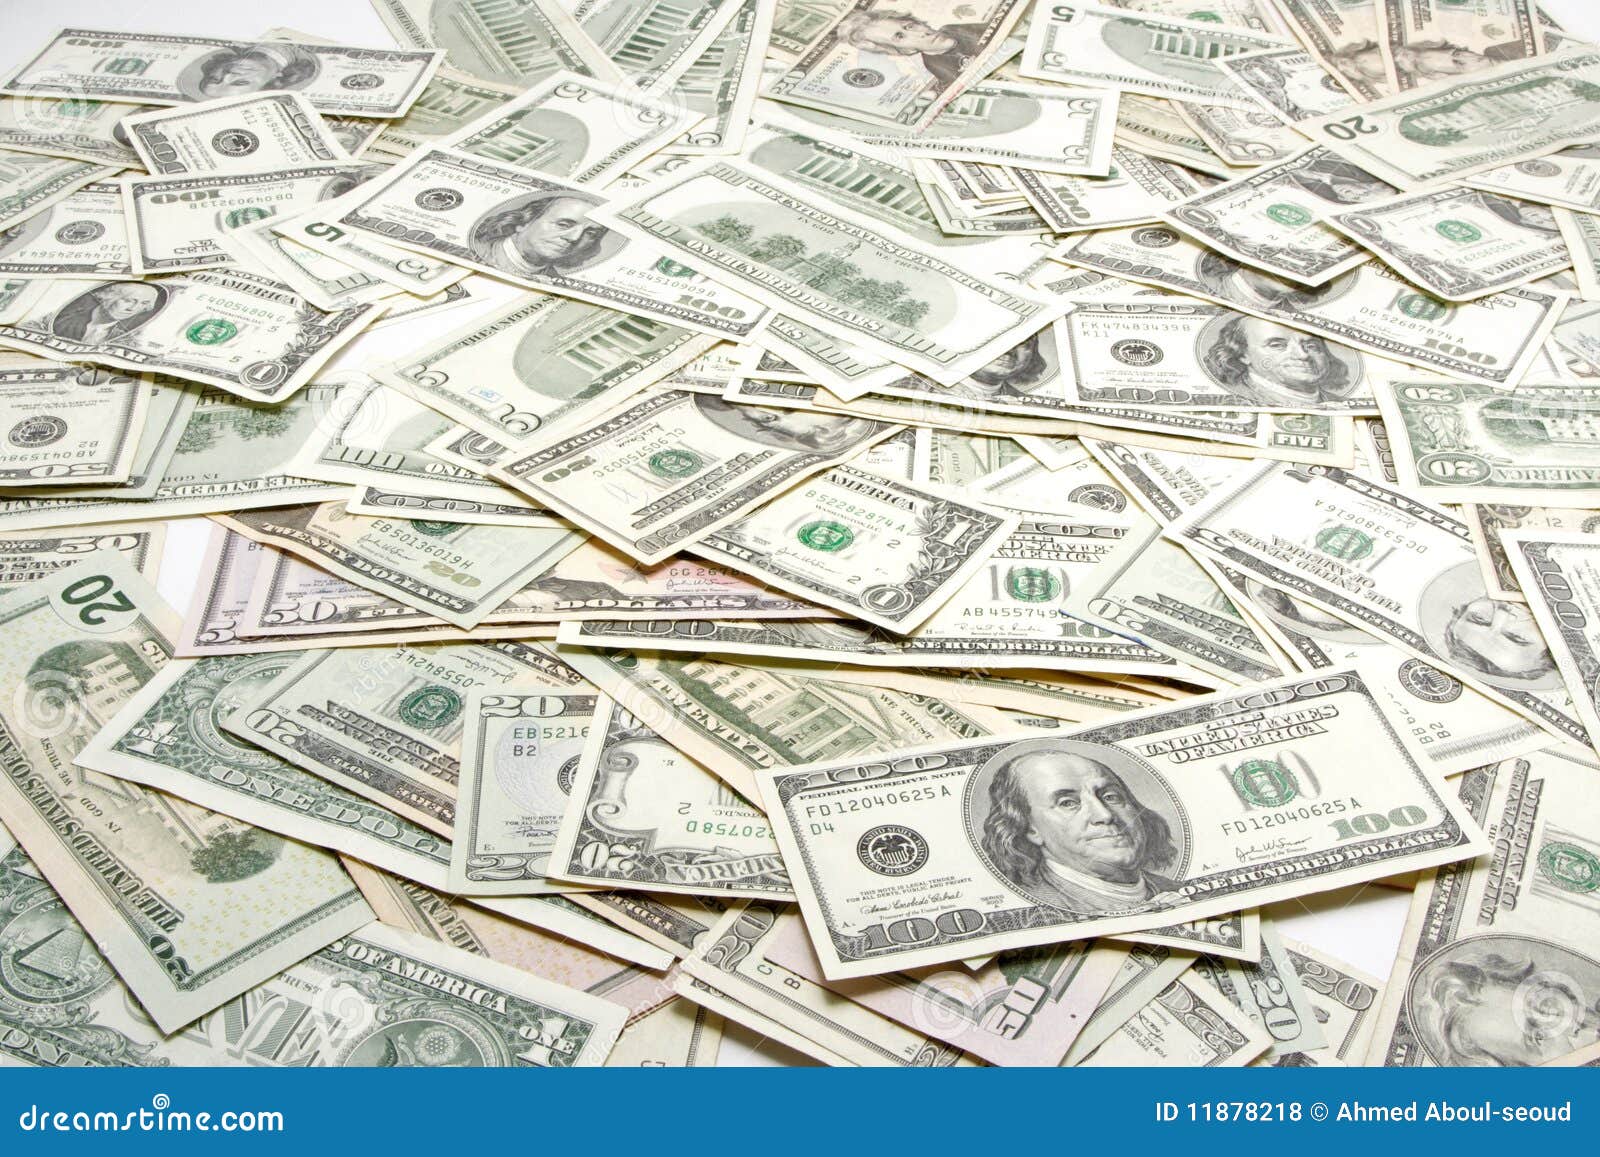 1 877 Money Background Photos Free Royalty Free Stock Photos From Dreamstime